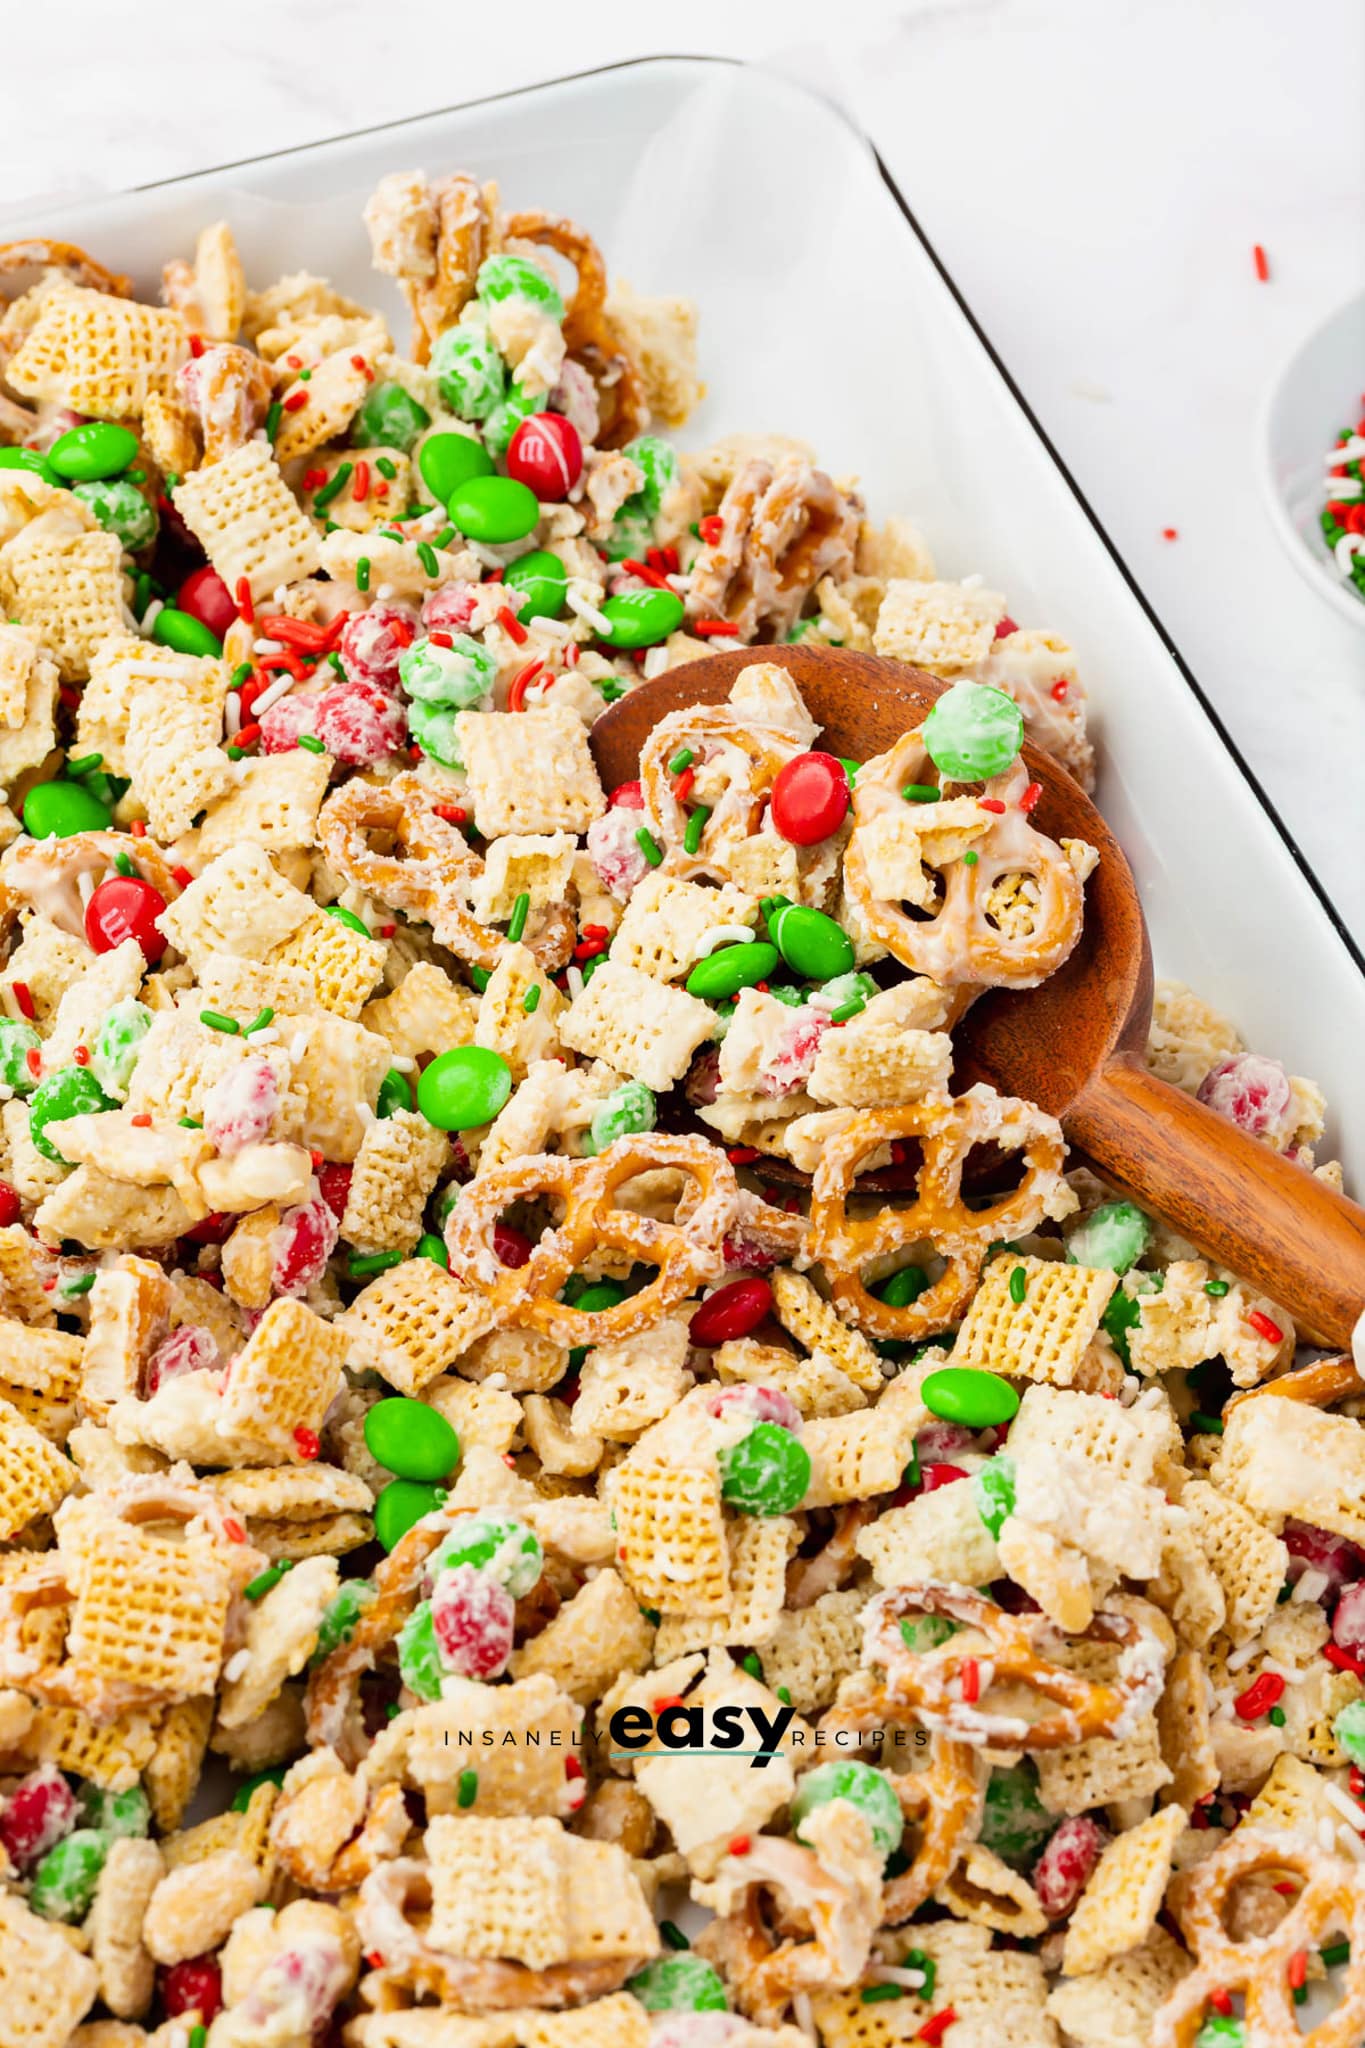 Extra M&ms and sprinkles added to white chocolate chex mix.